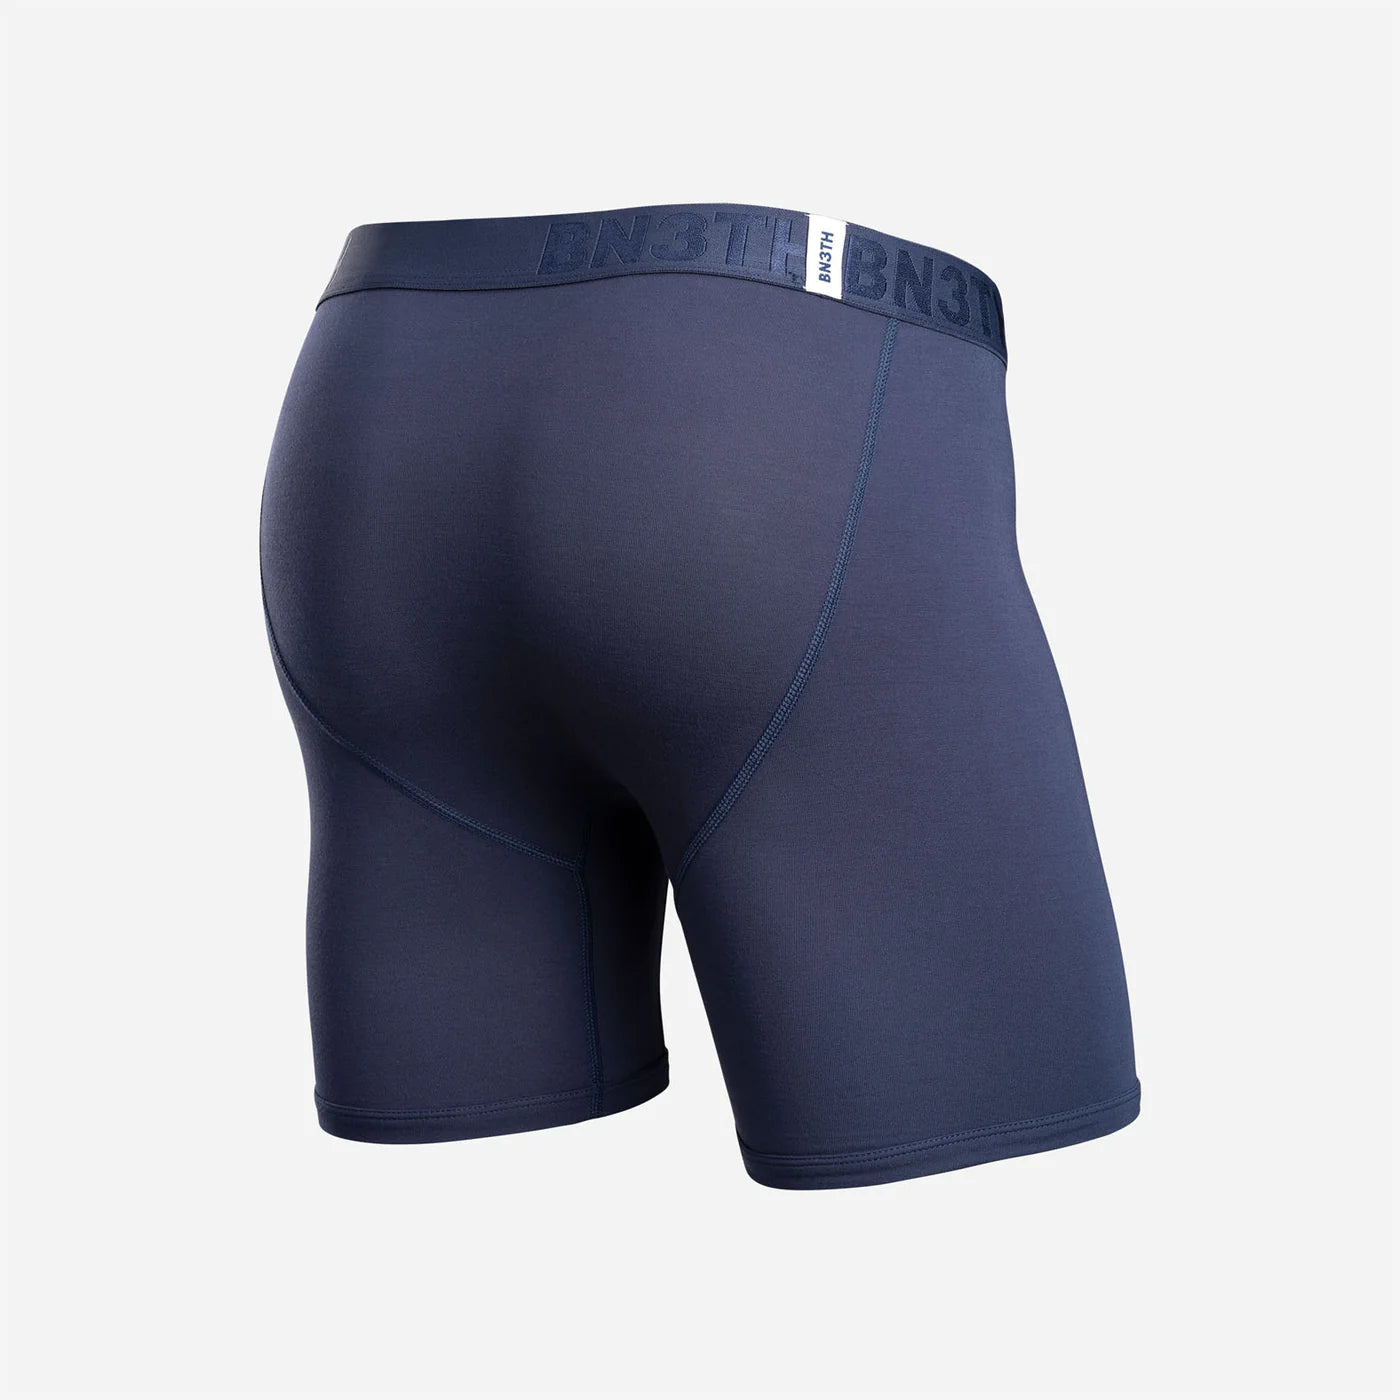 BN3TH Classic Boxer Brief - Solid Navy